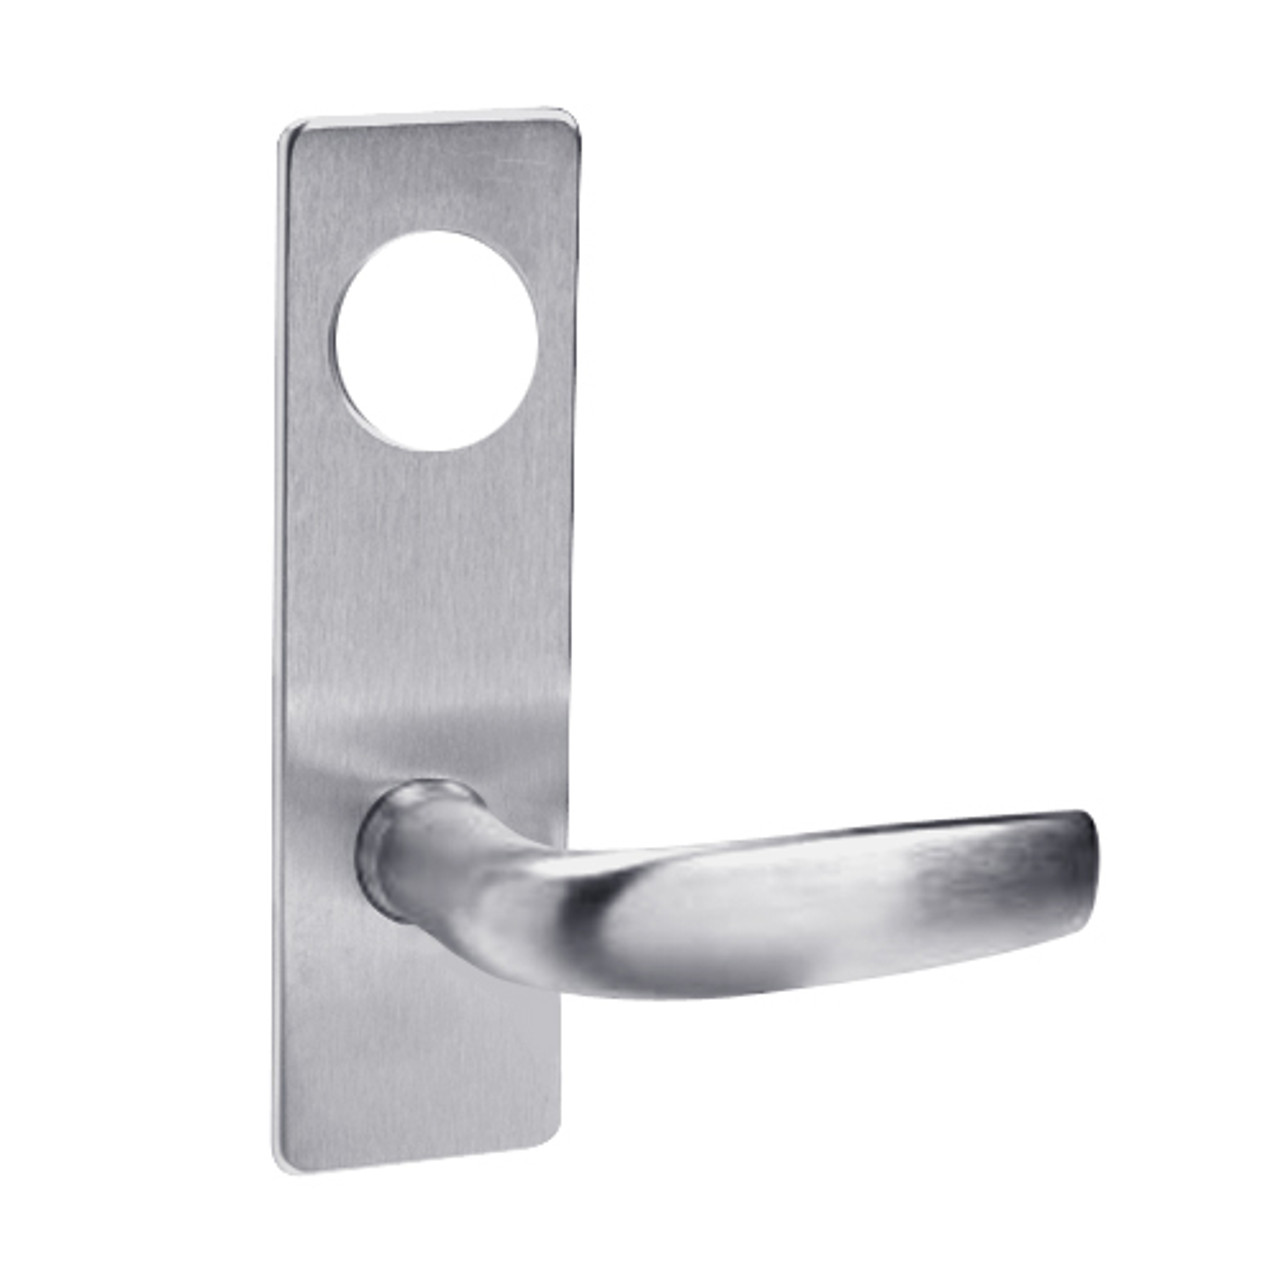 ML2051-CSN-626-CL7 Corbin Russwin ML2000 Series IC 7-Pin Less Core Mortise Office Locksets with Citation Lever in Satin Chrome